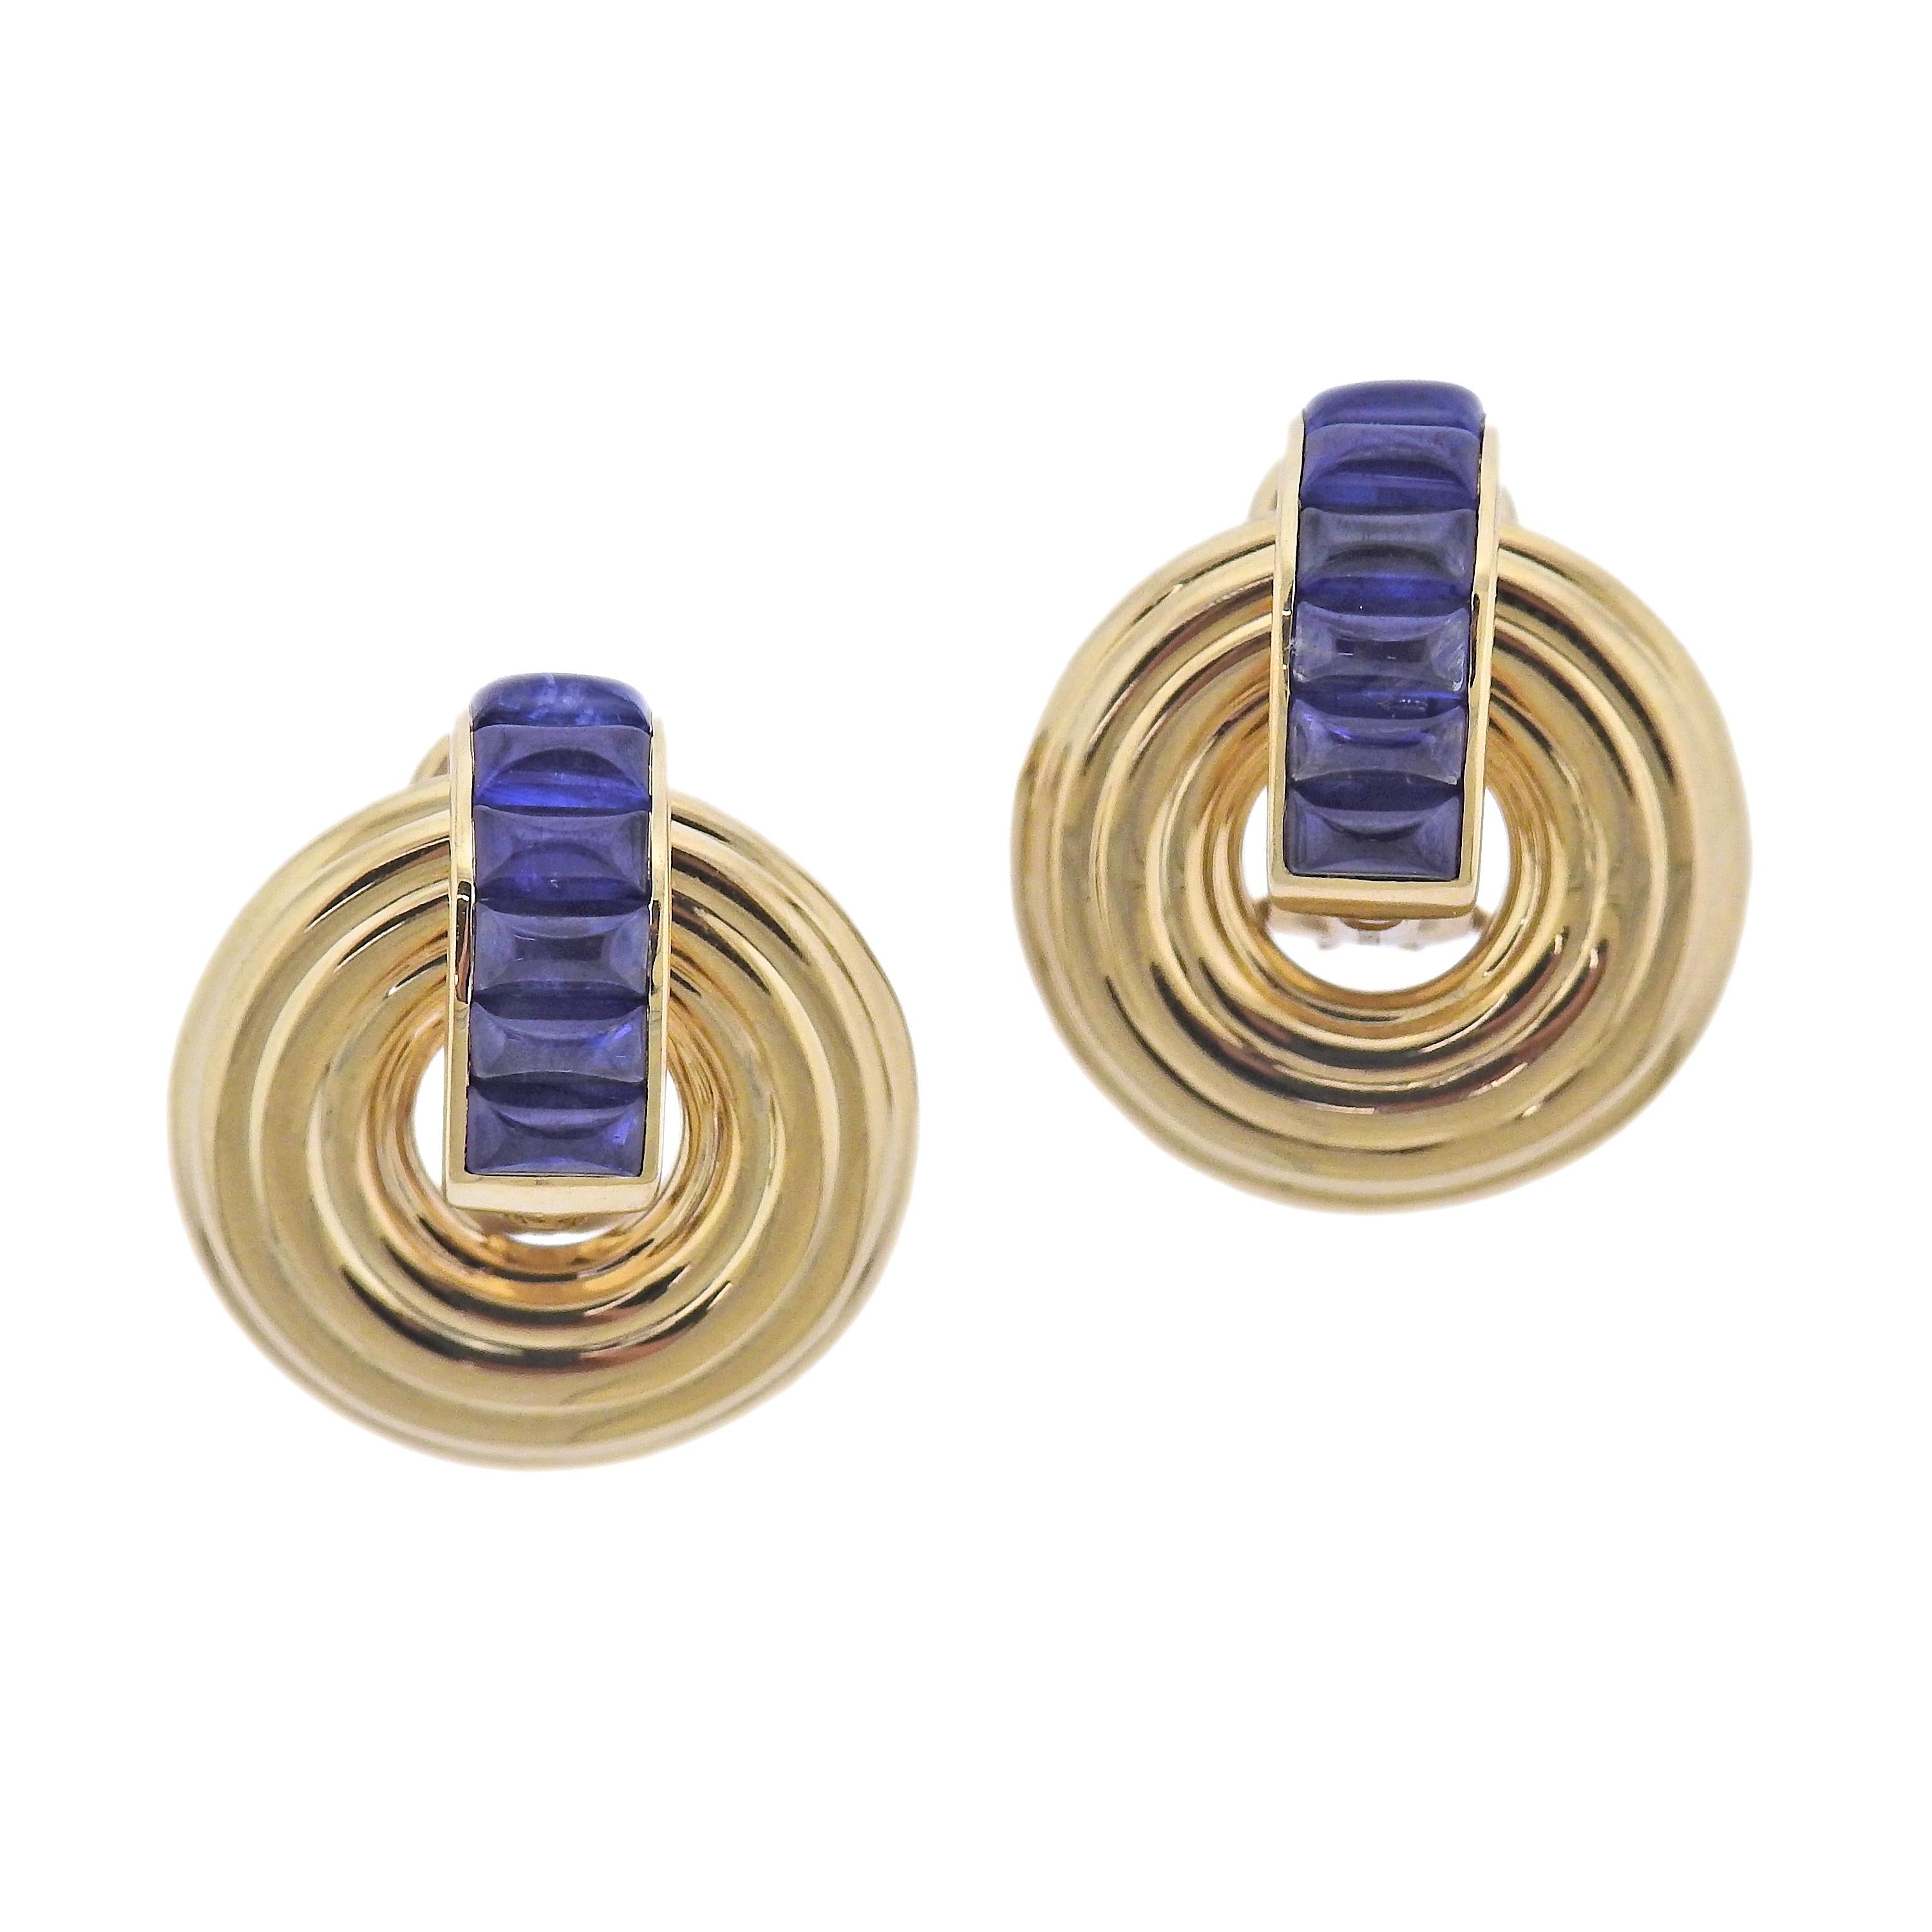 Brand new pair of Giro reversible and versatile earrings by Seaman Schepps. Set in 18k yellow gold, with white ceramic and sapphires. Come with packaging.  Earrings are 25mm x 21mm, circles are reversible and removable. Marked: 248753, 750, Shell